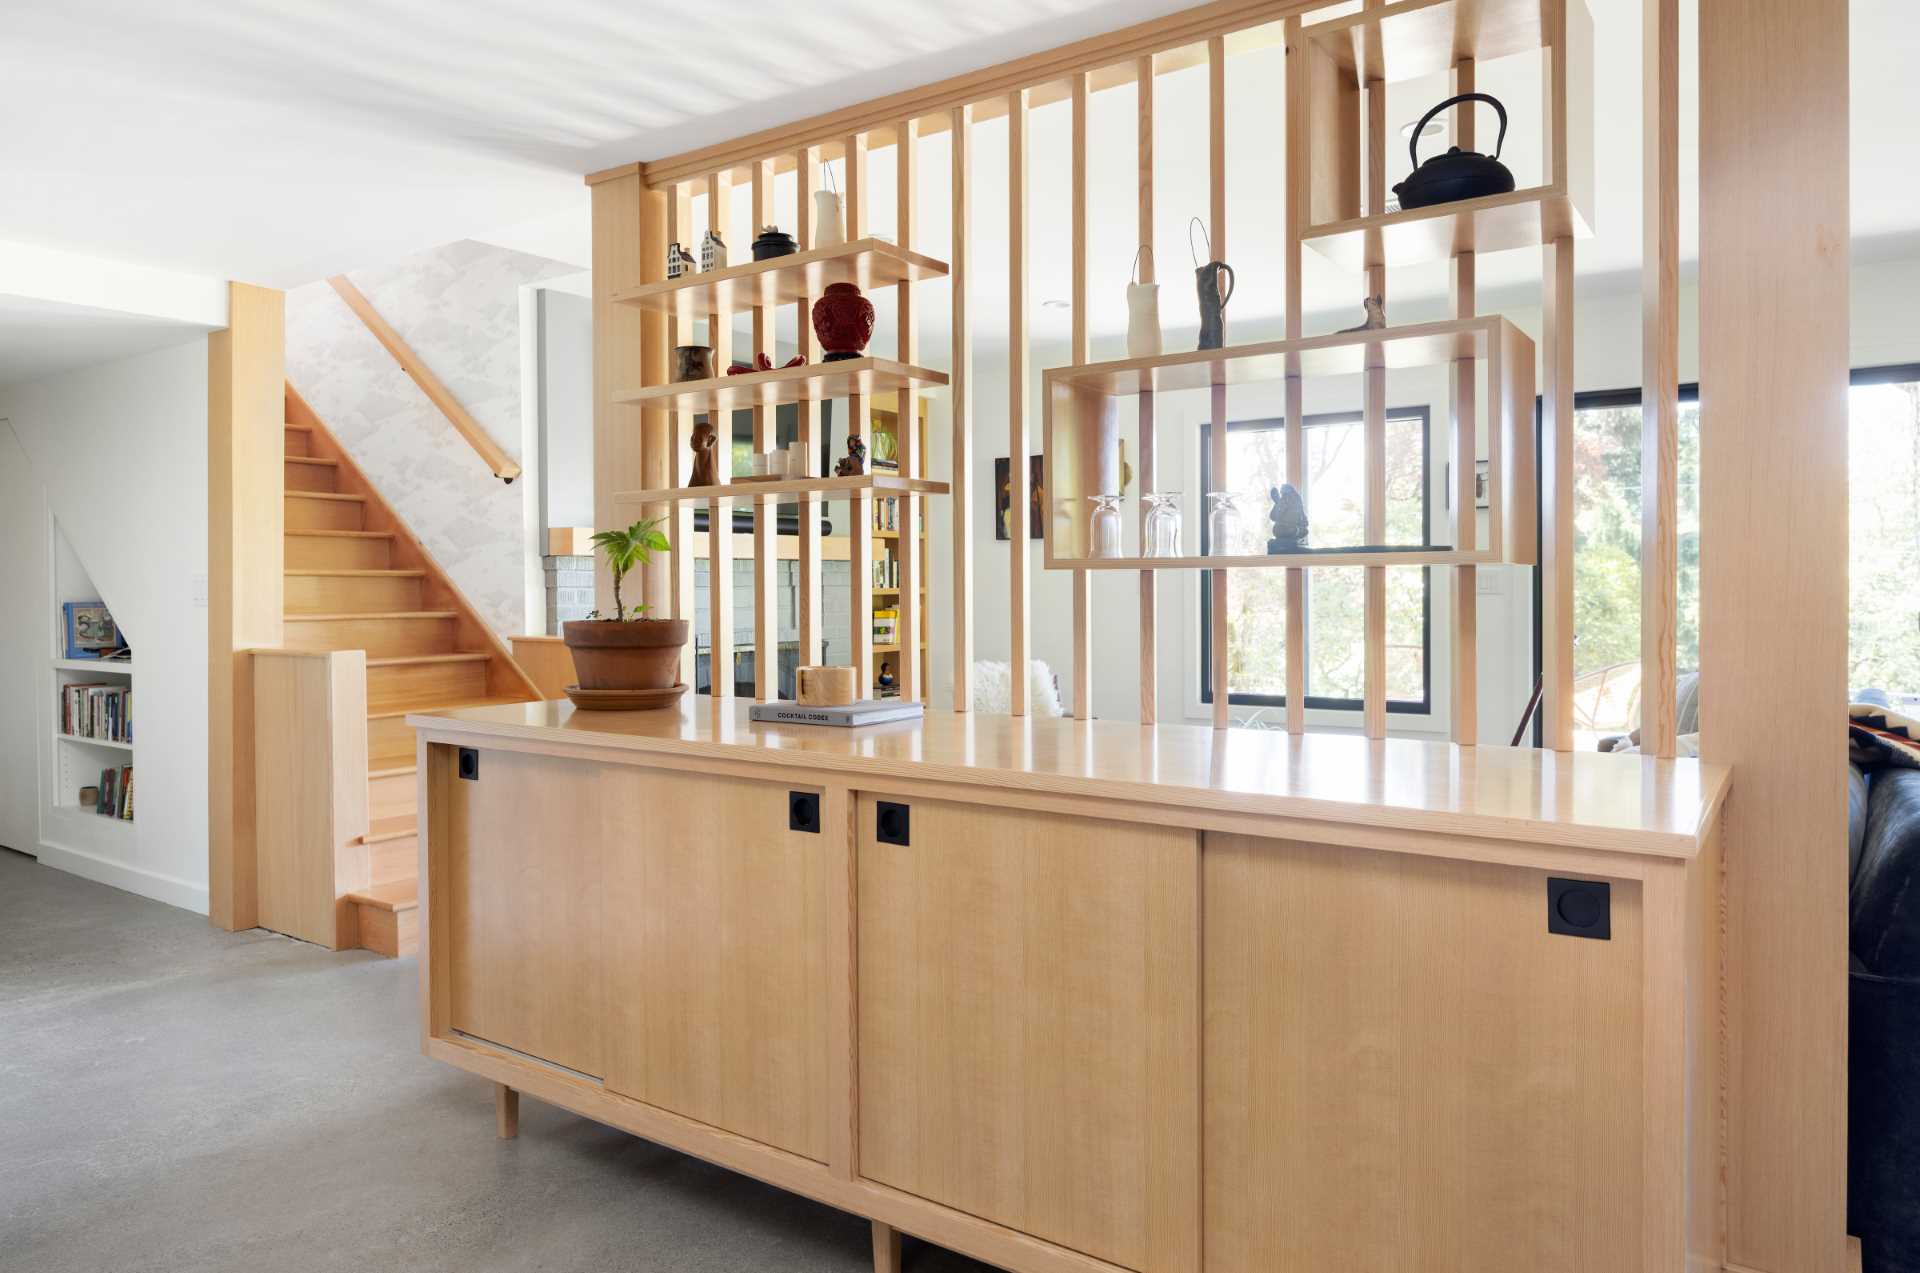 Wood slats and cabinets are used to create a divider in this family room.